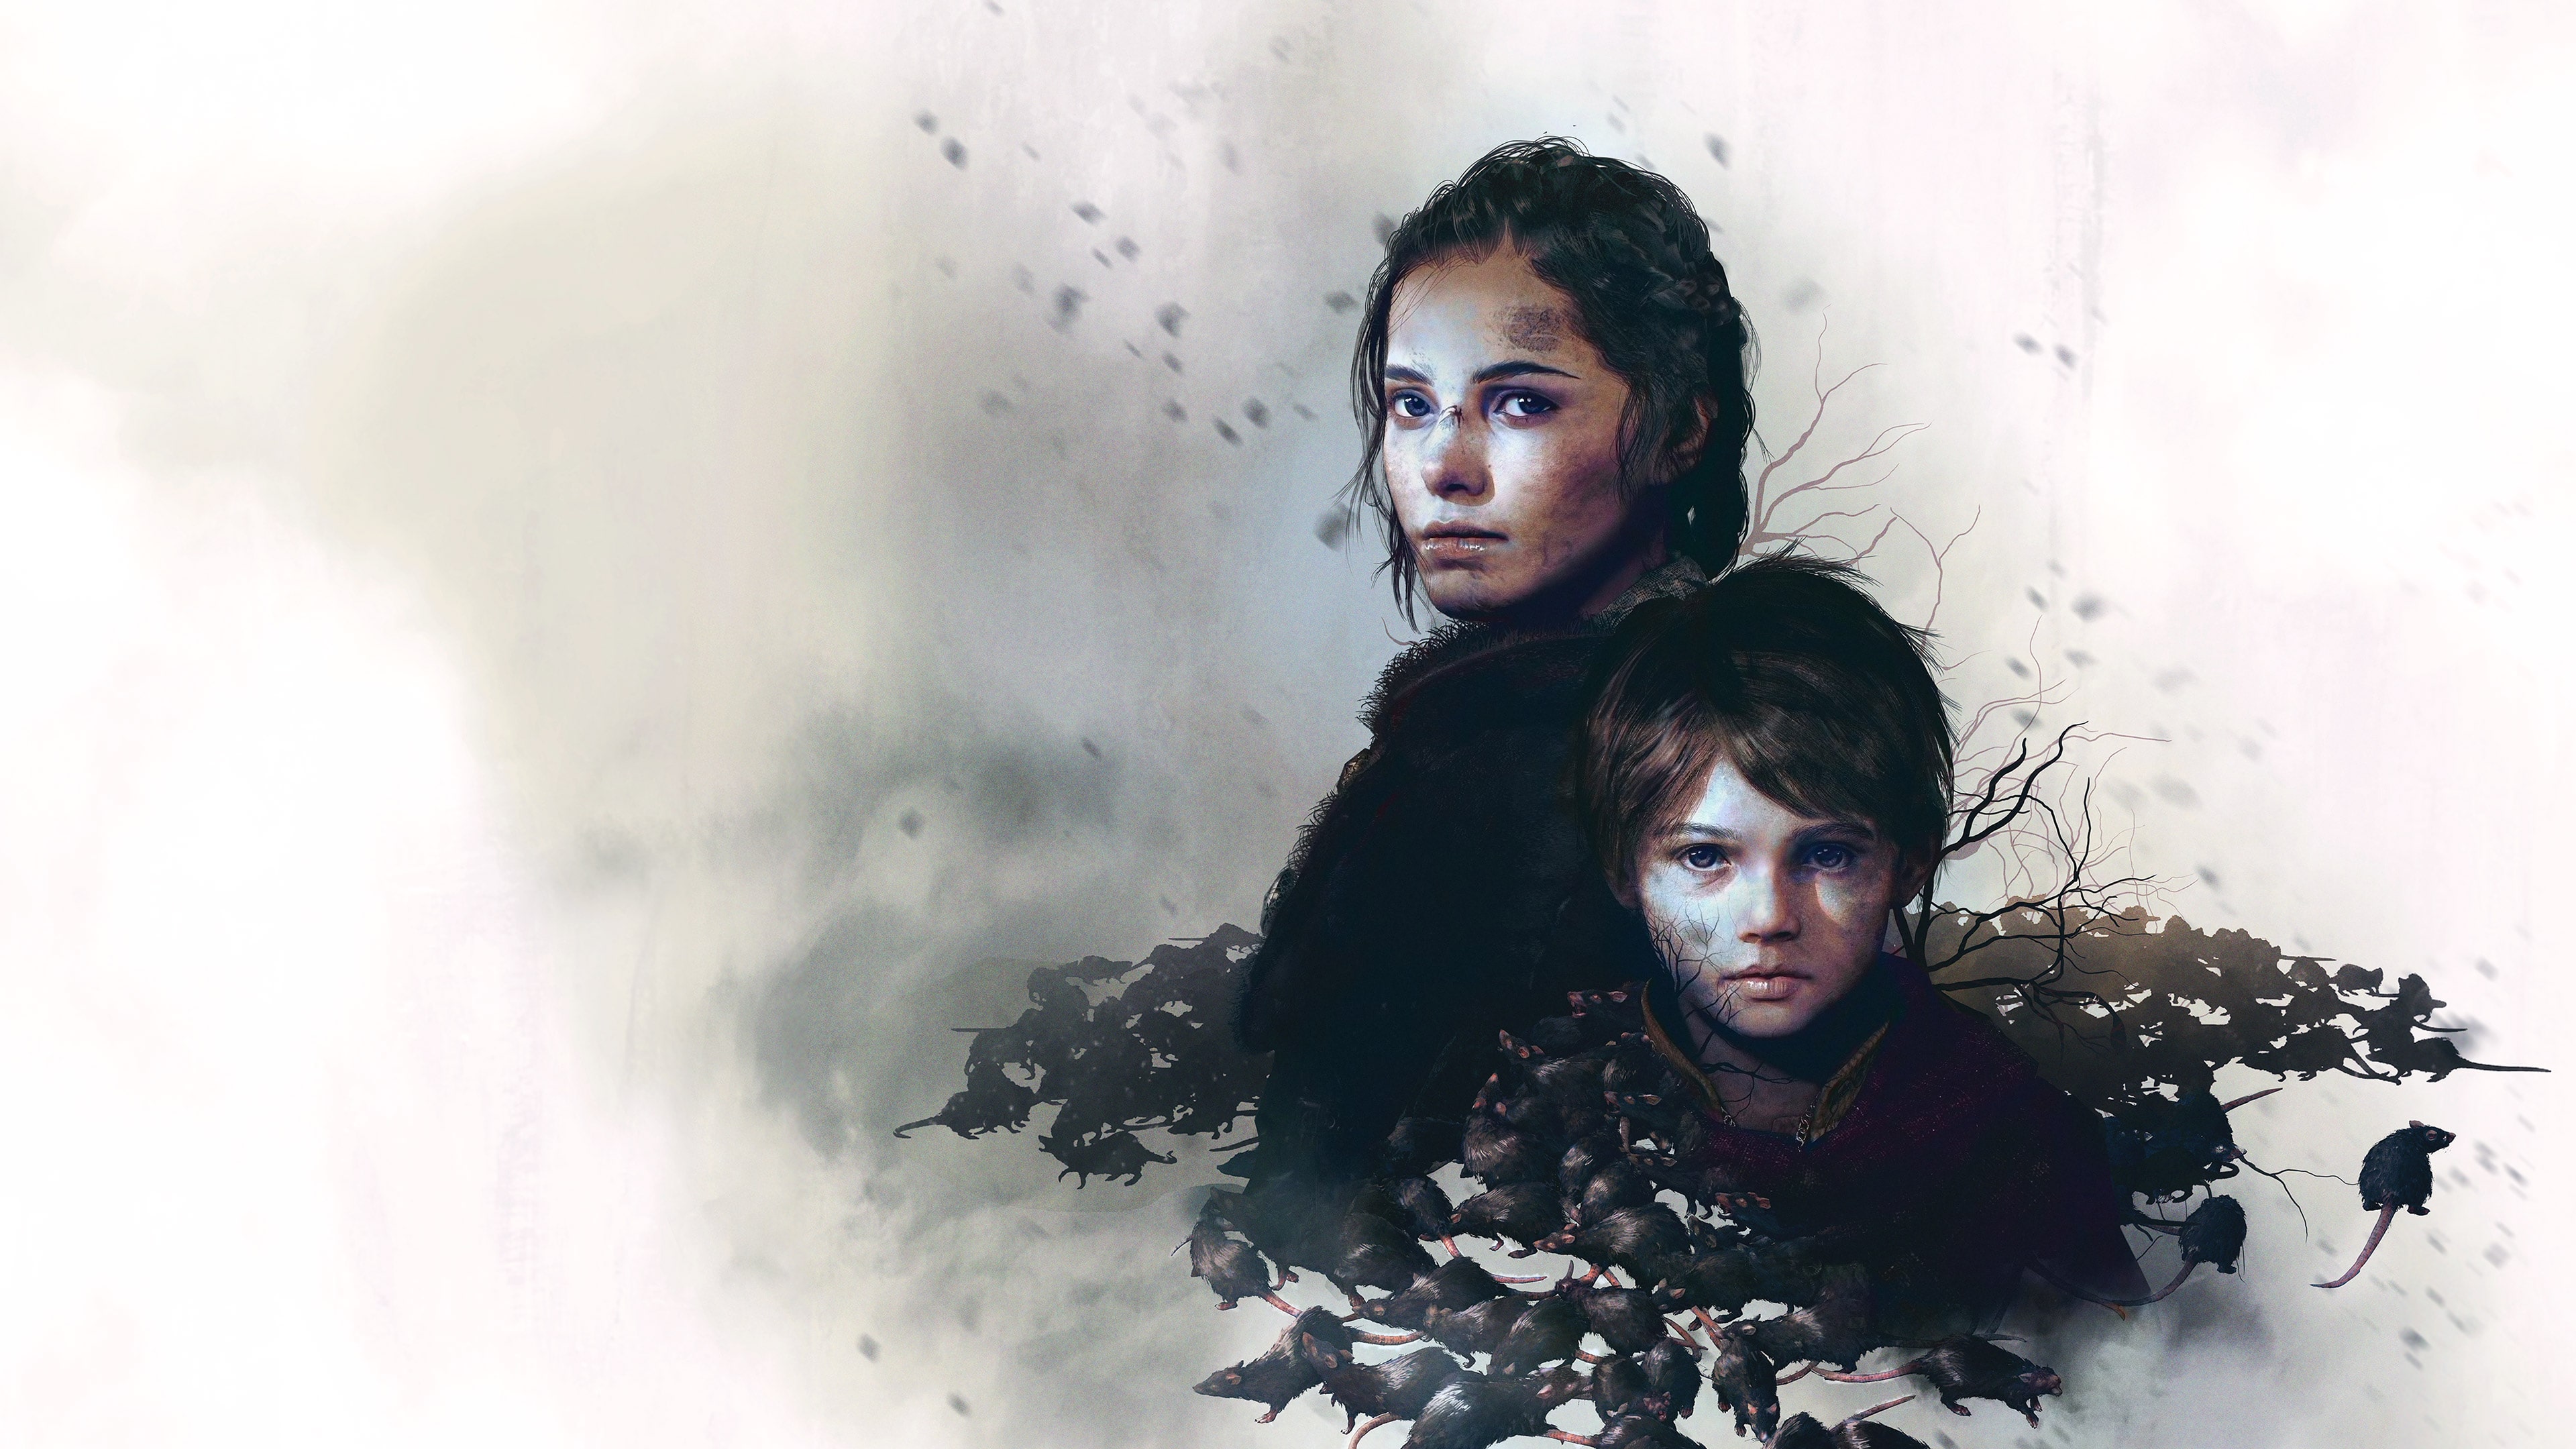 A Plague Tale: Innocence - Coats of Arms DLC (English/Chinese/Korean Ver.)